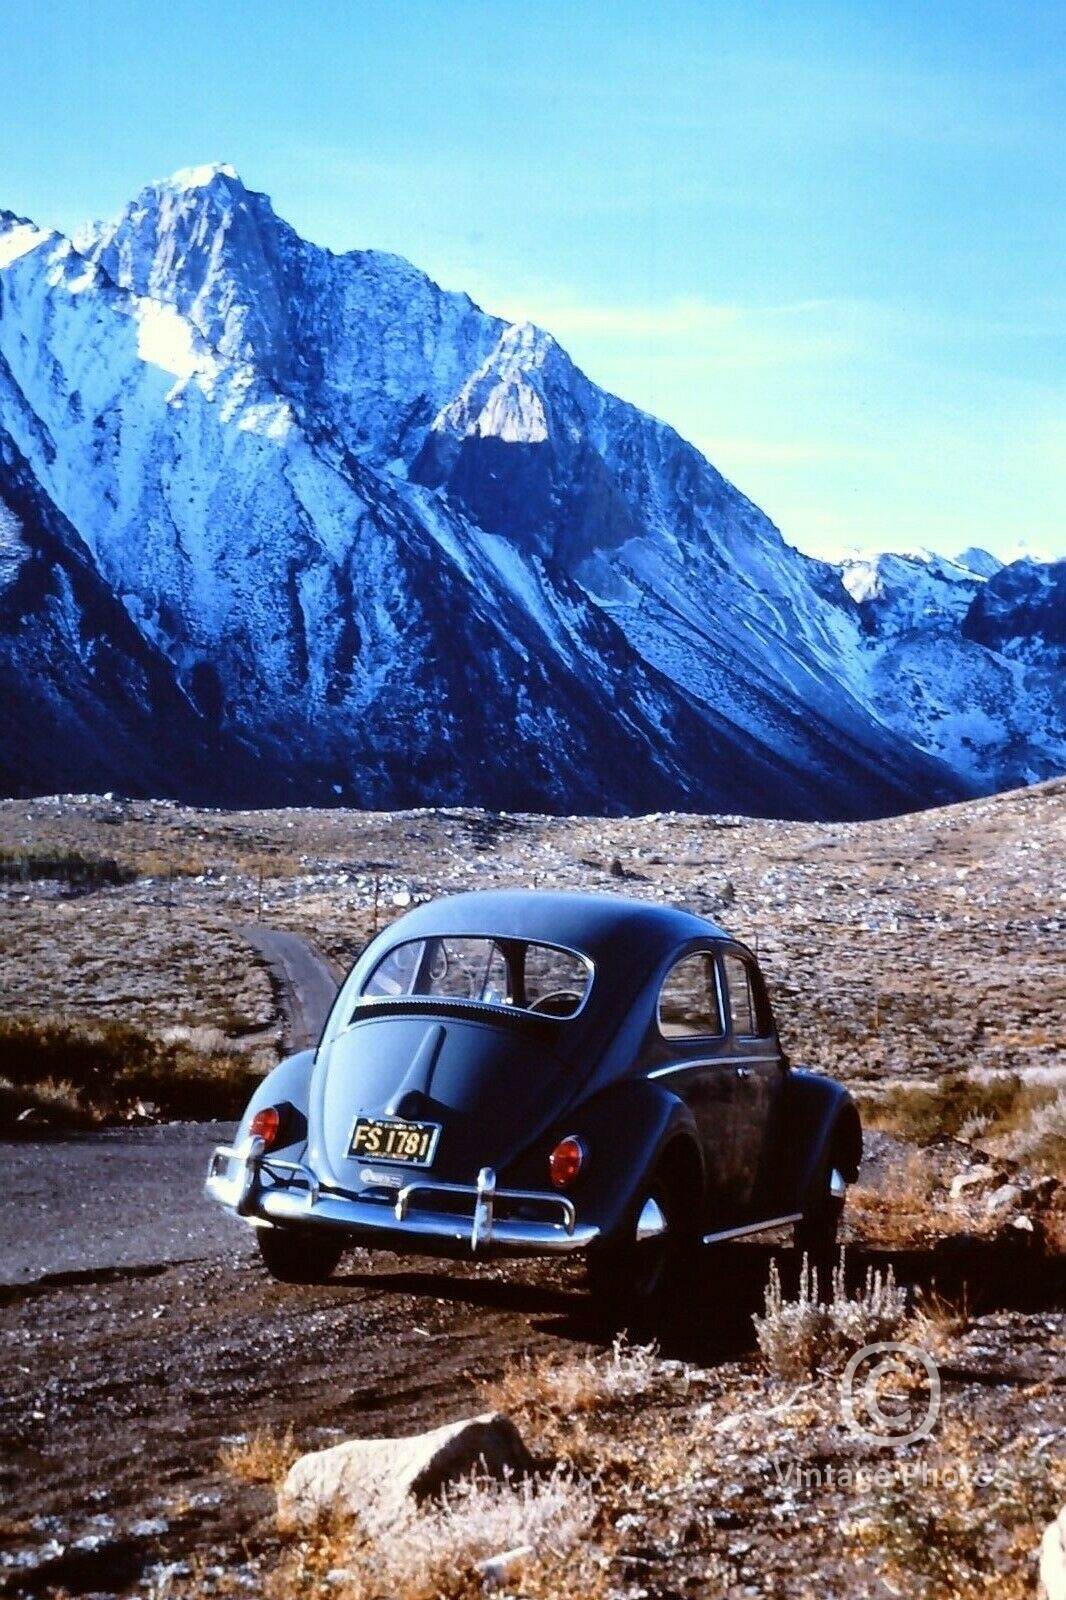 1963 VW Beetle Classic, Mountains